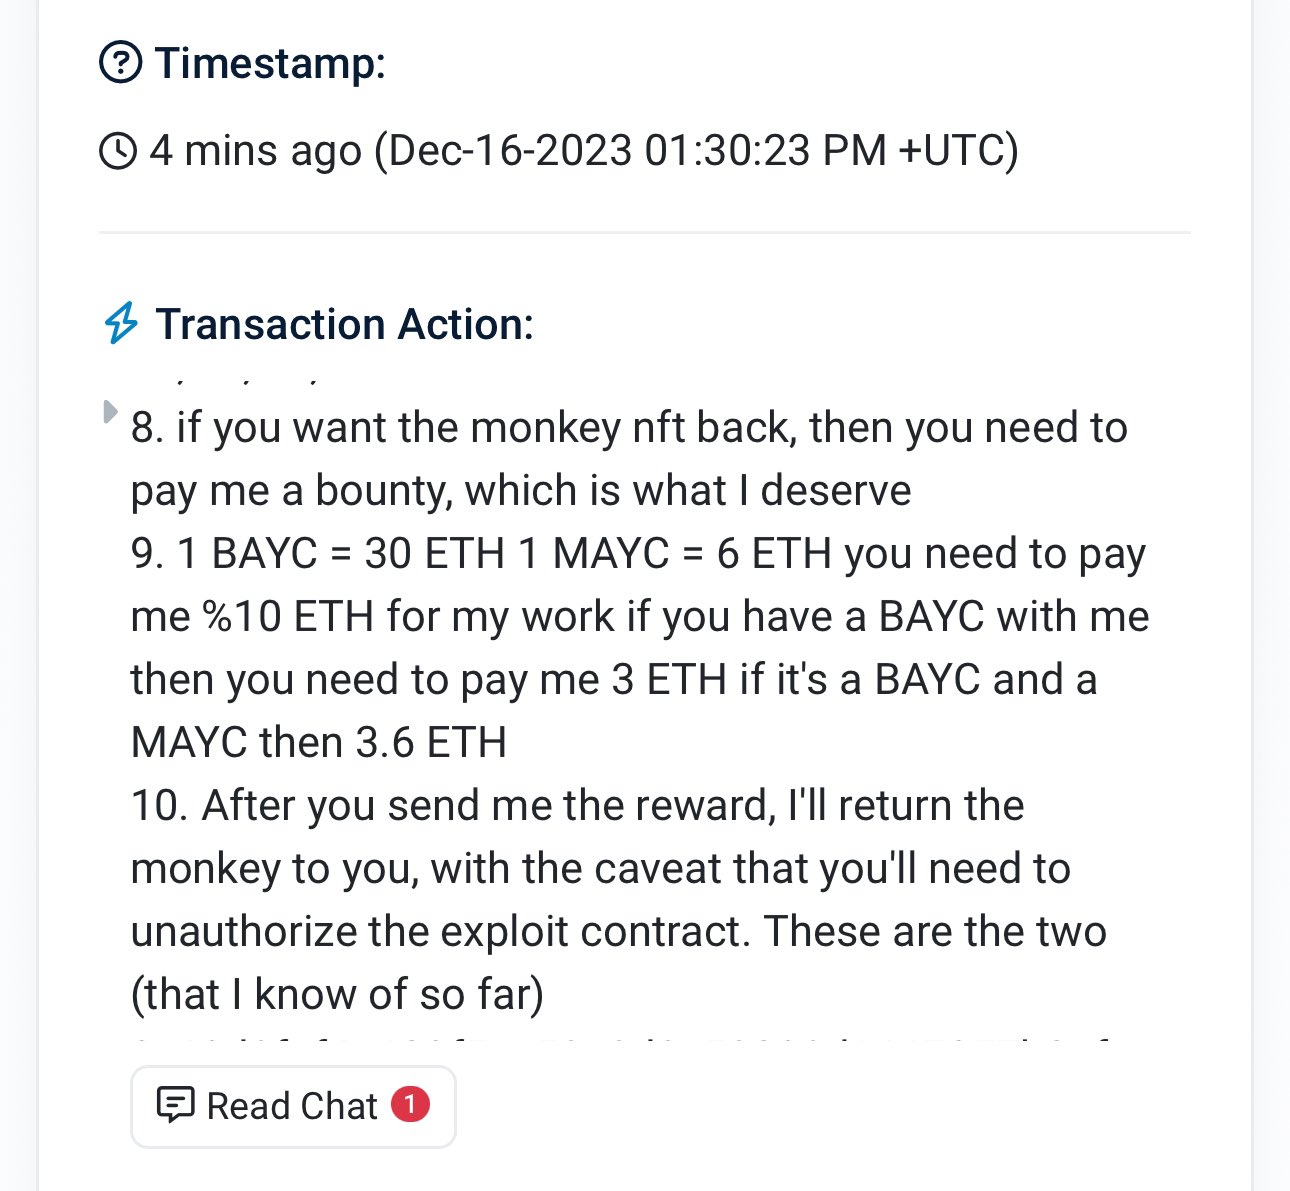 P2P platform NFT Trader breached, asks users to withdraw approval - 2